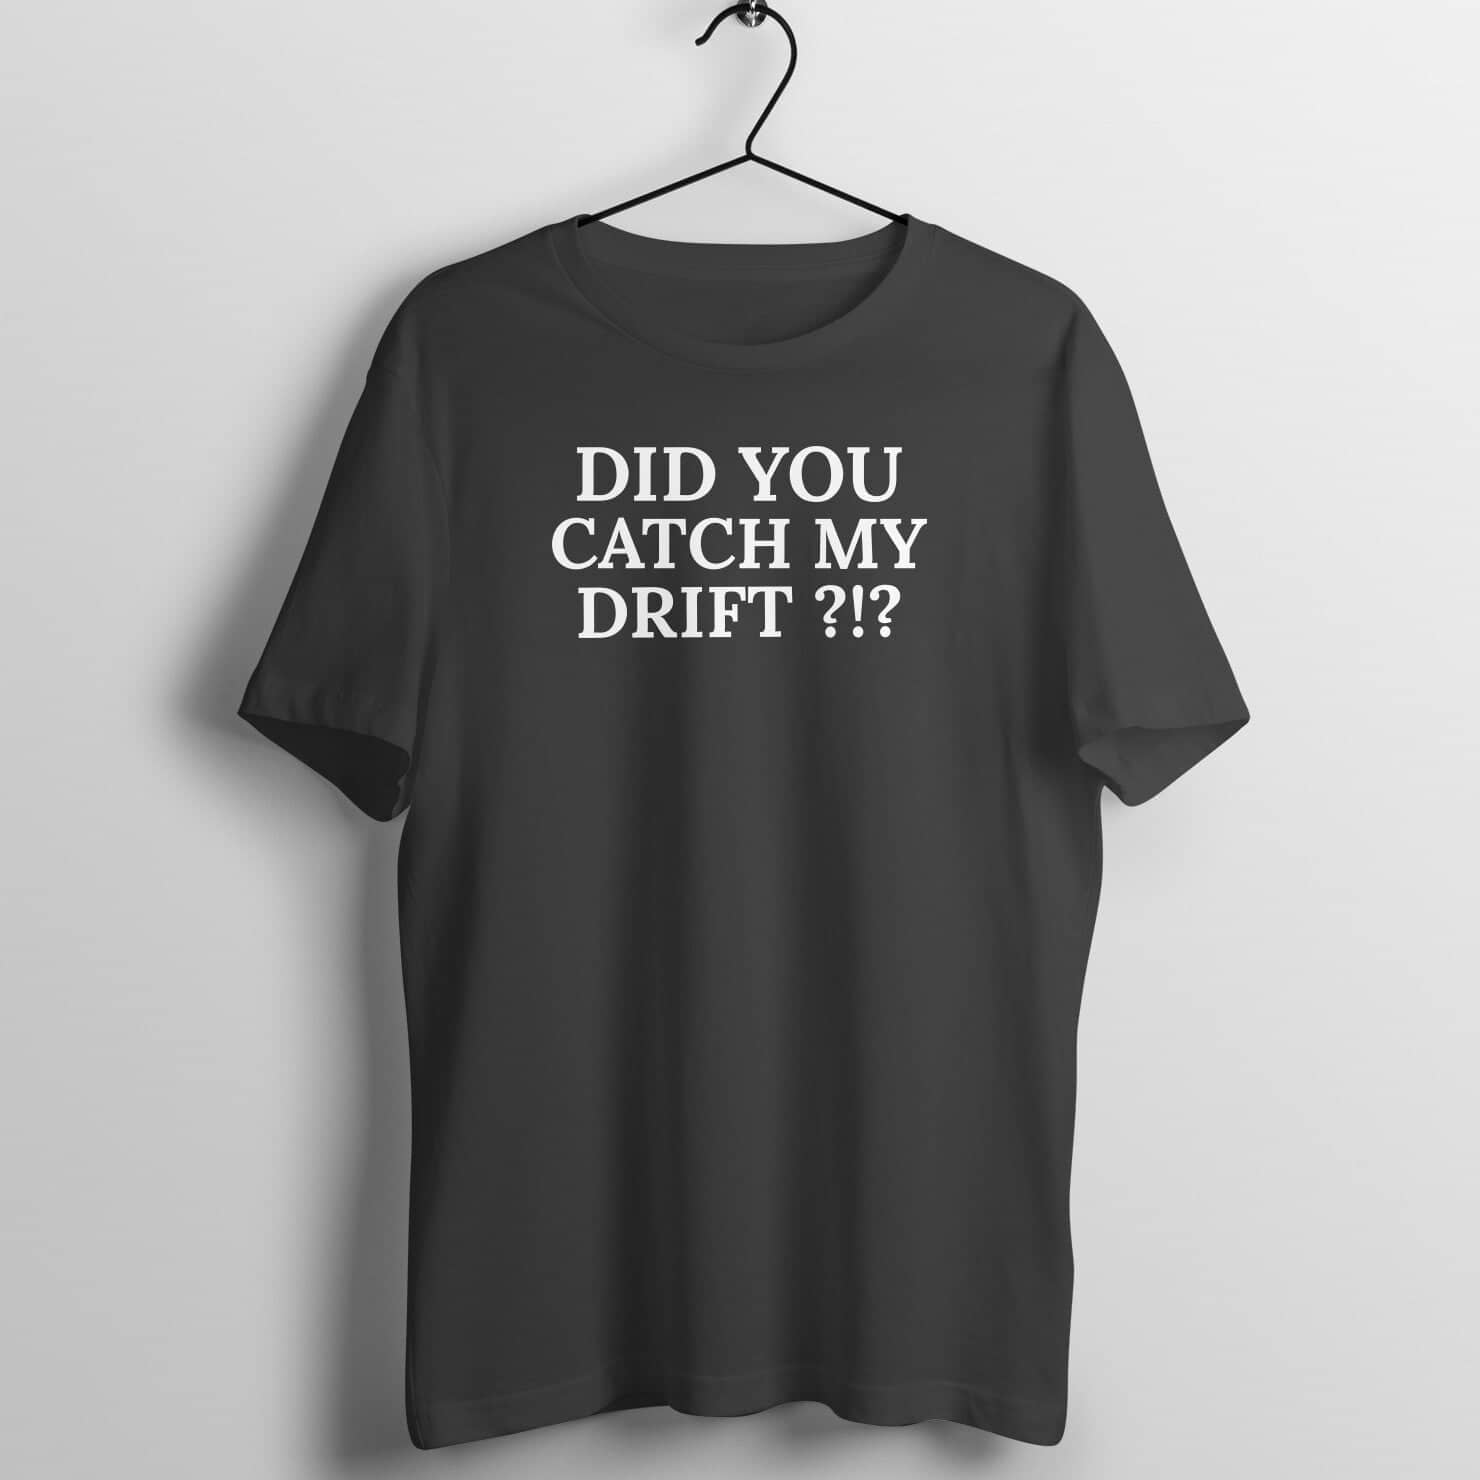 Did You Catch My Drift ?!? Exclusive Original T Shirt for Men and Women freeshipping - Catch My Drift India